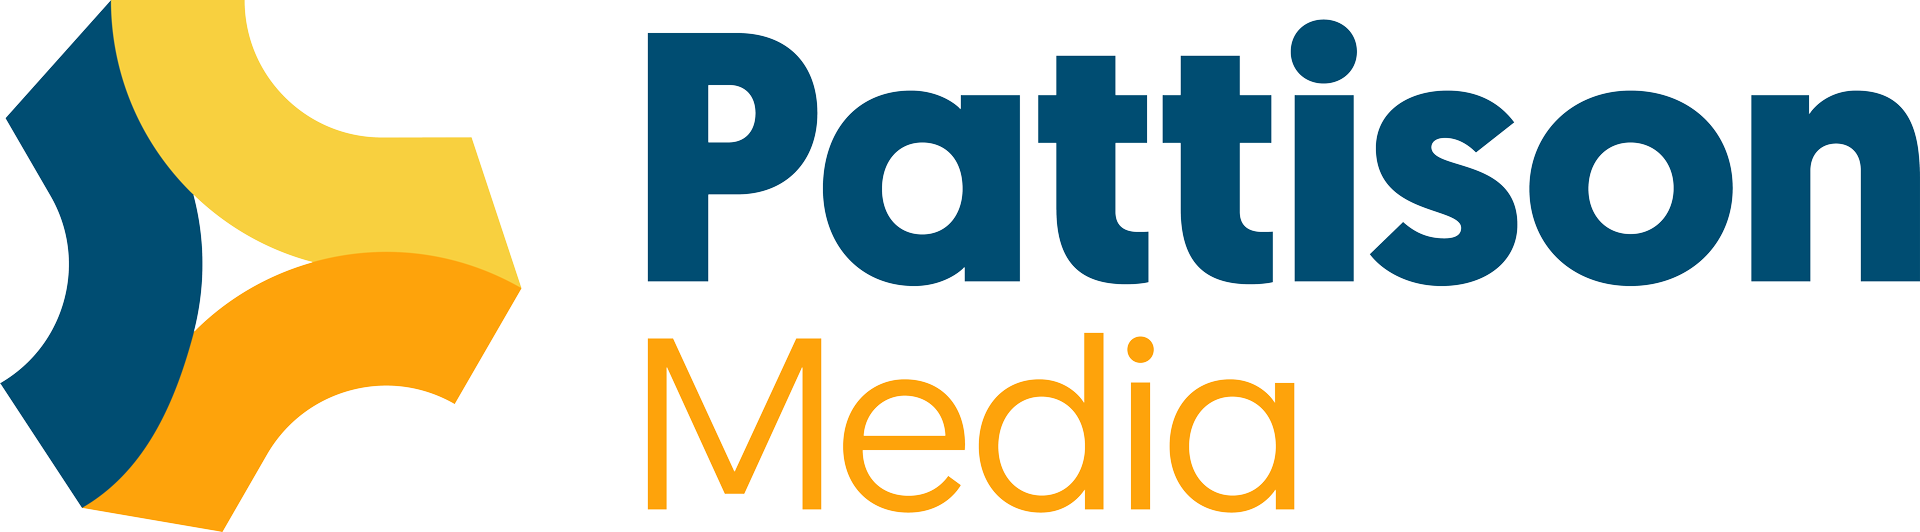 Pattison-Media-Small.png